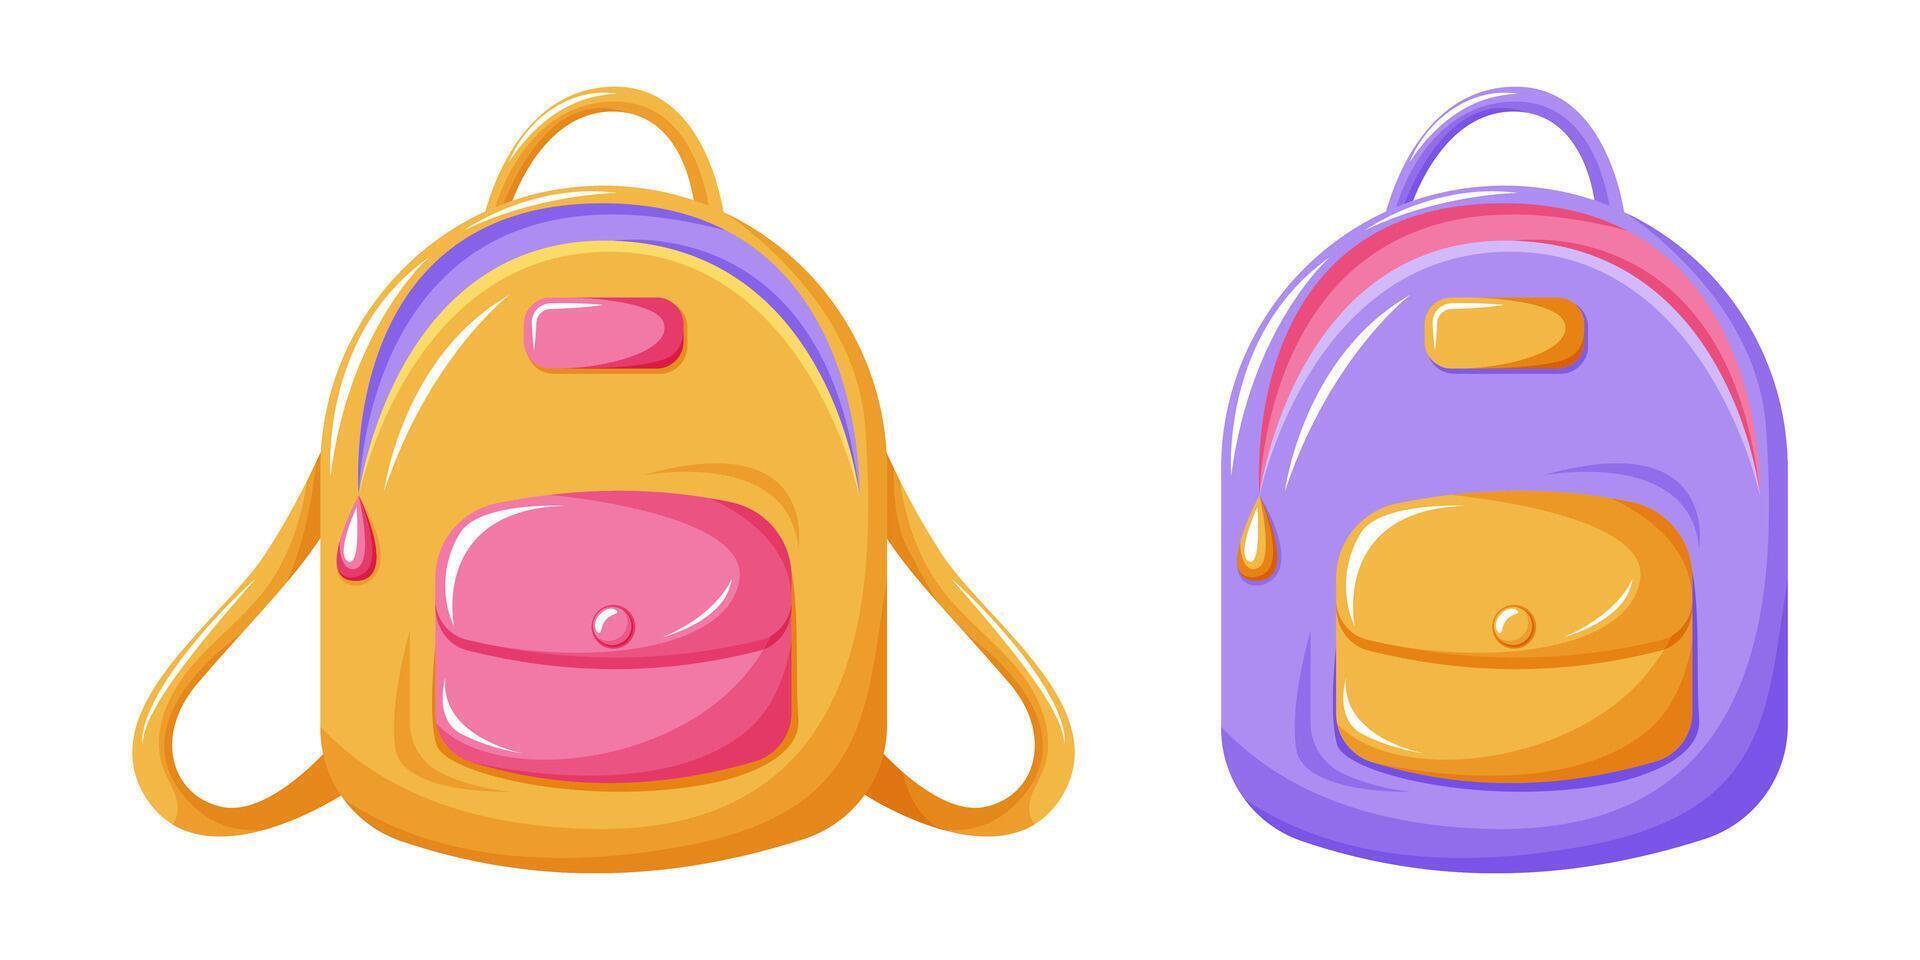 School childish backpack, yellow and purple color. Children briefcase, schoolbag for supplies. Back to school, education concept, modern flat style vector